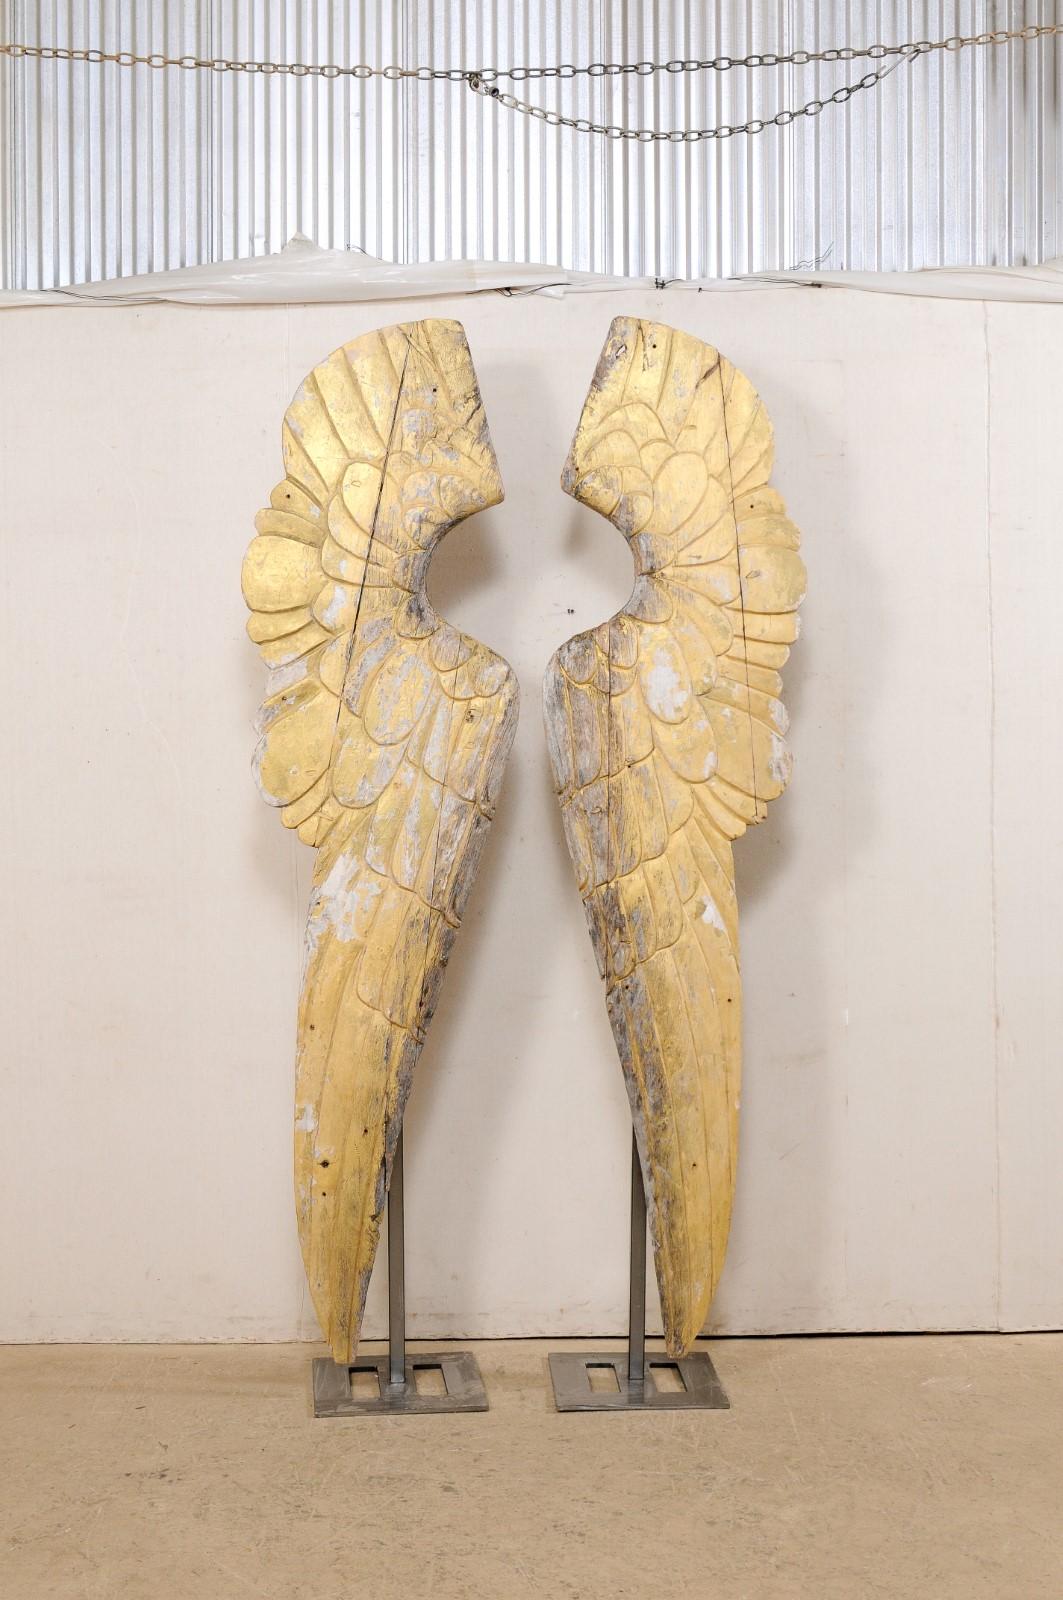 A very large pair of European carved and gilt wood wings on custom iron stands. This pair of vintage angel wings from Europe have been hand-carved of wood and retain much of their original gilt finish. They have a lovely patina, and are each